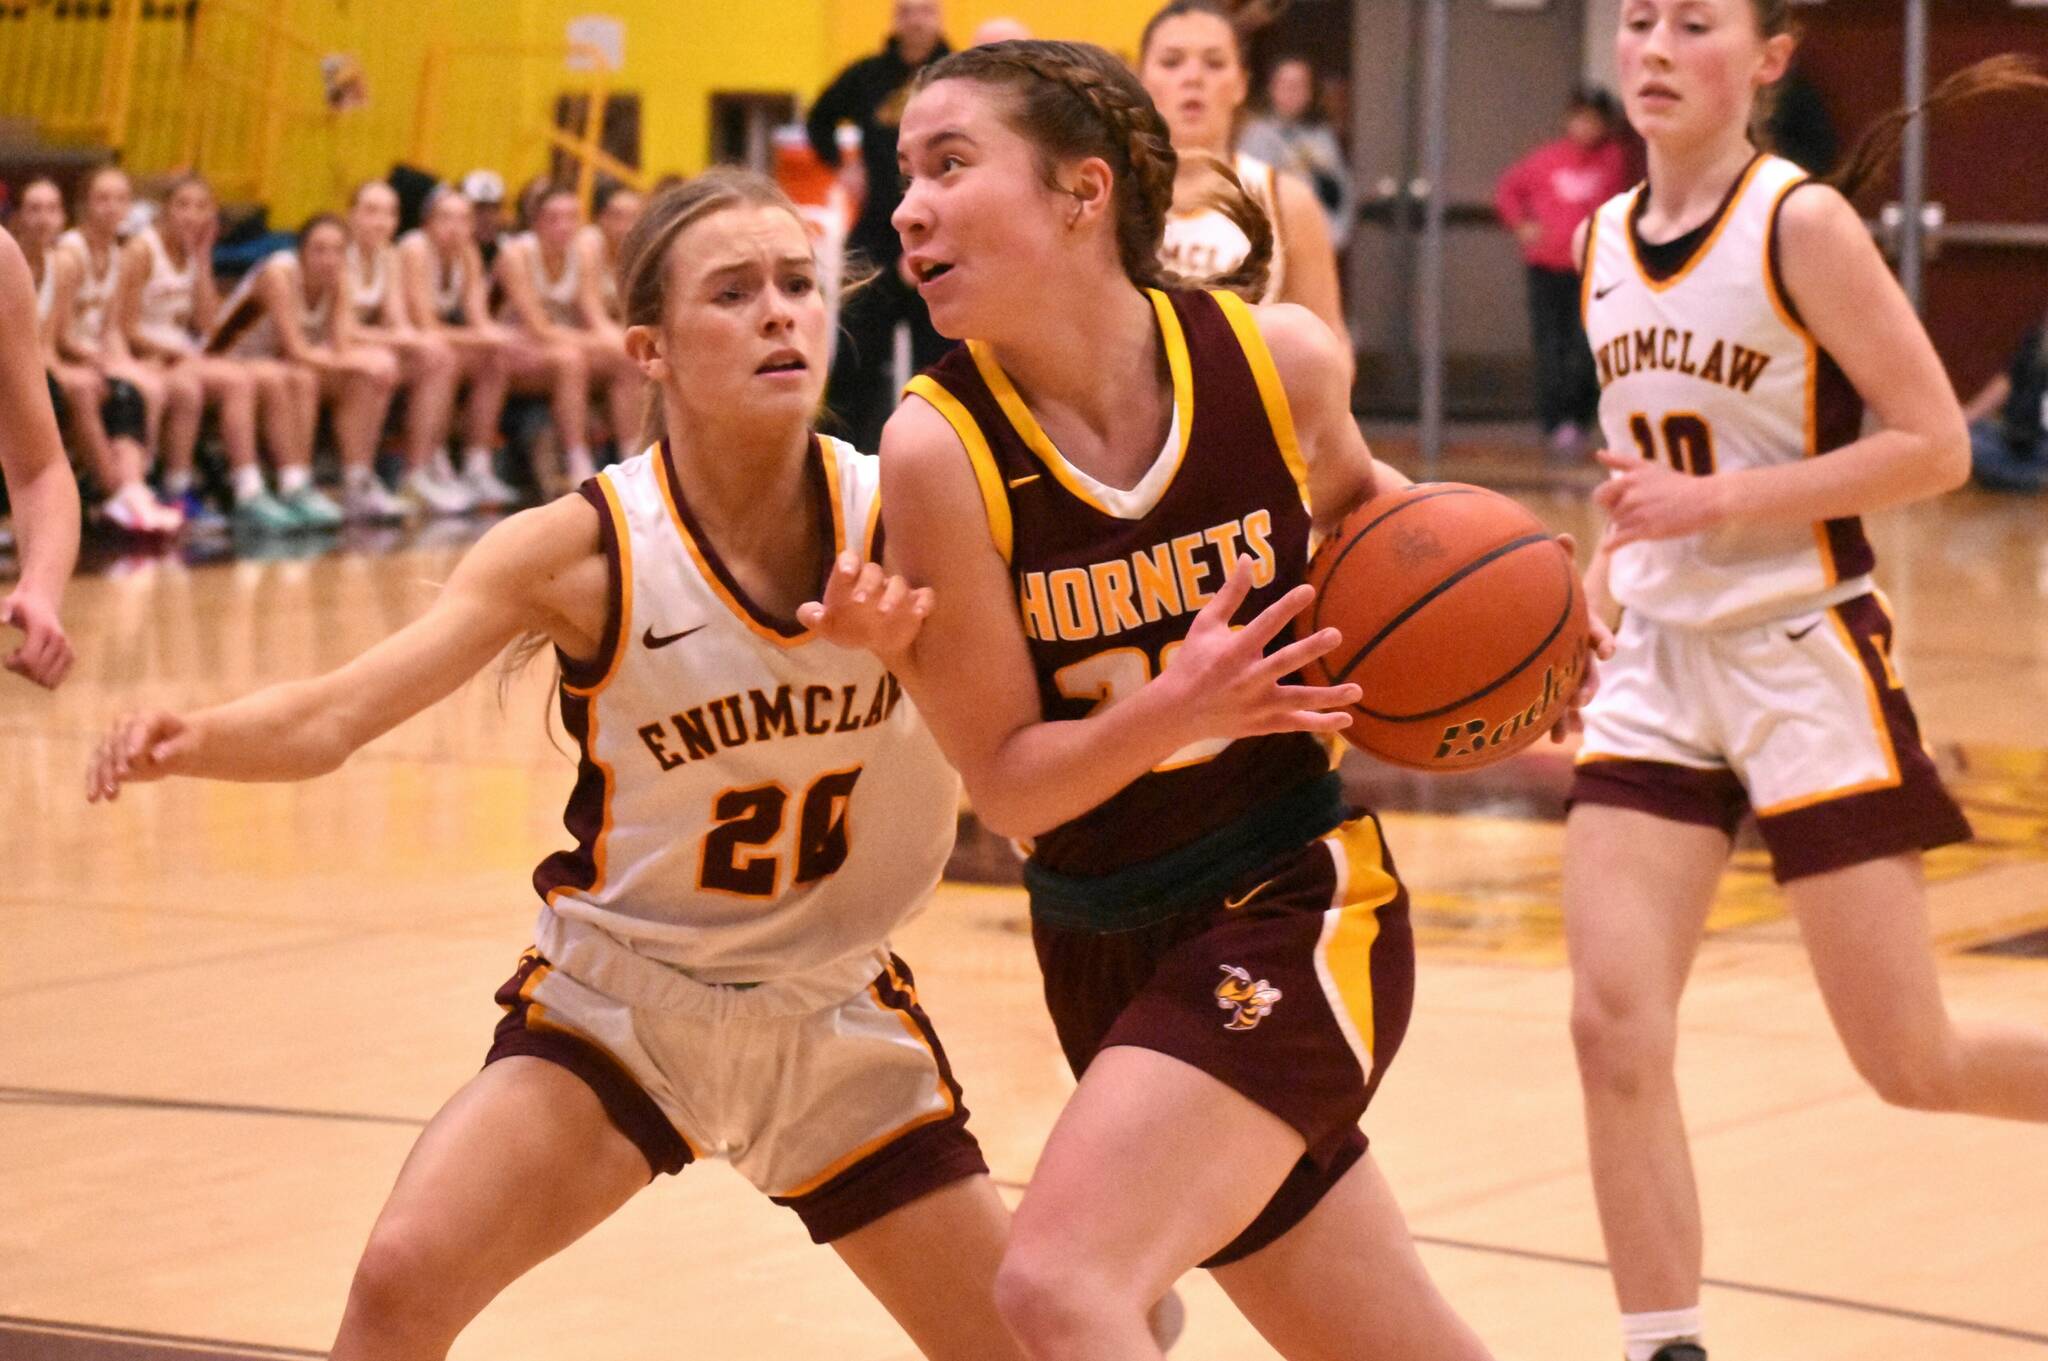 White River’s Maggee Schmitz looks to get past Enumclaw’s Camryn Thomas, driving to the hoop during her team’s Friday night victory. Photo by Kevin Hanson